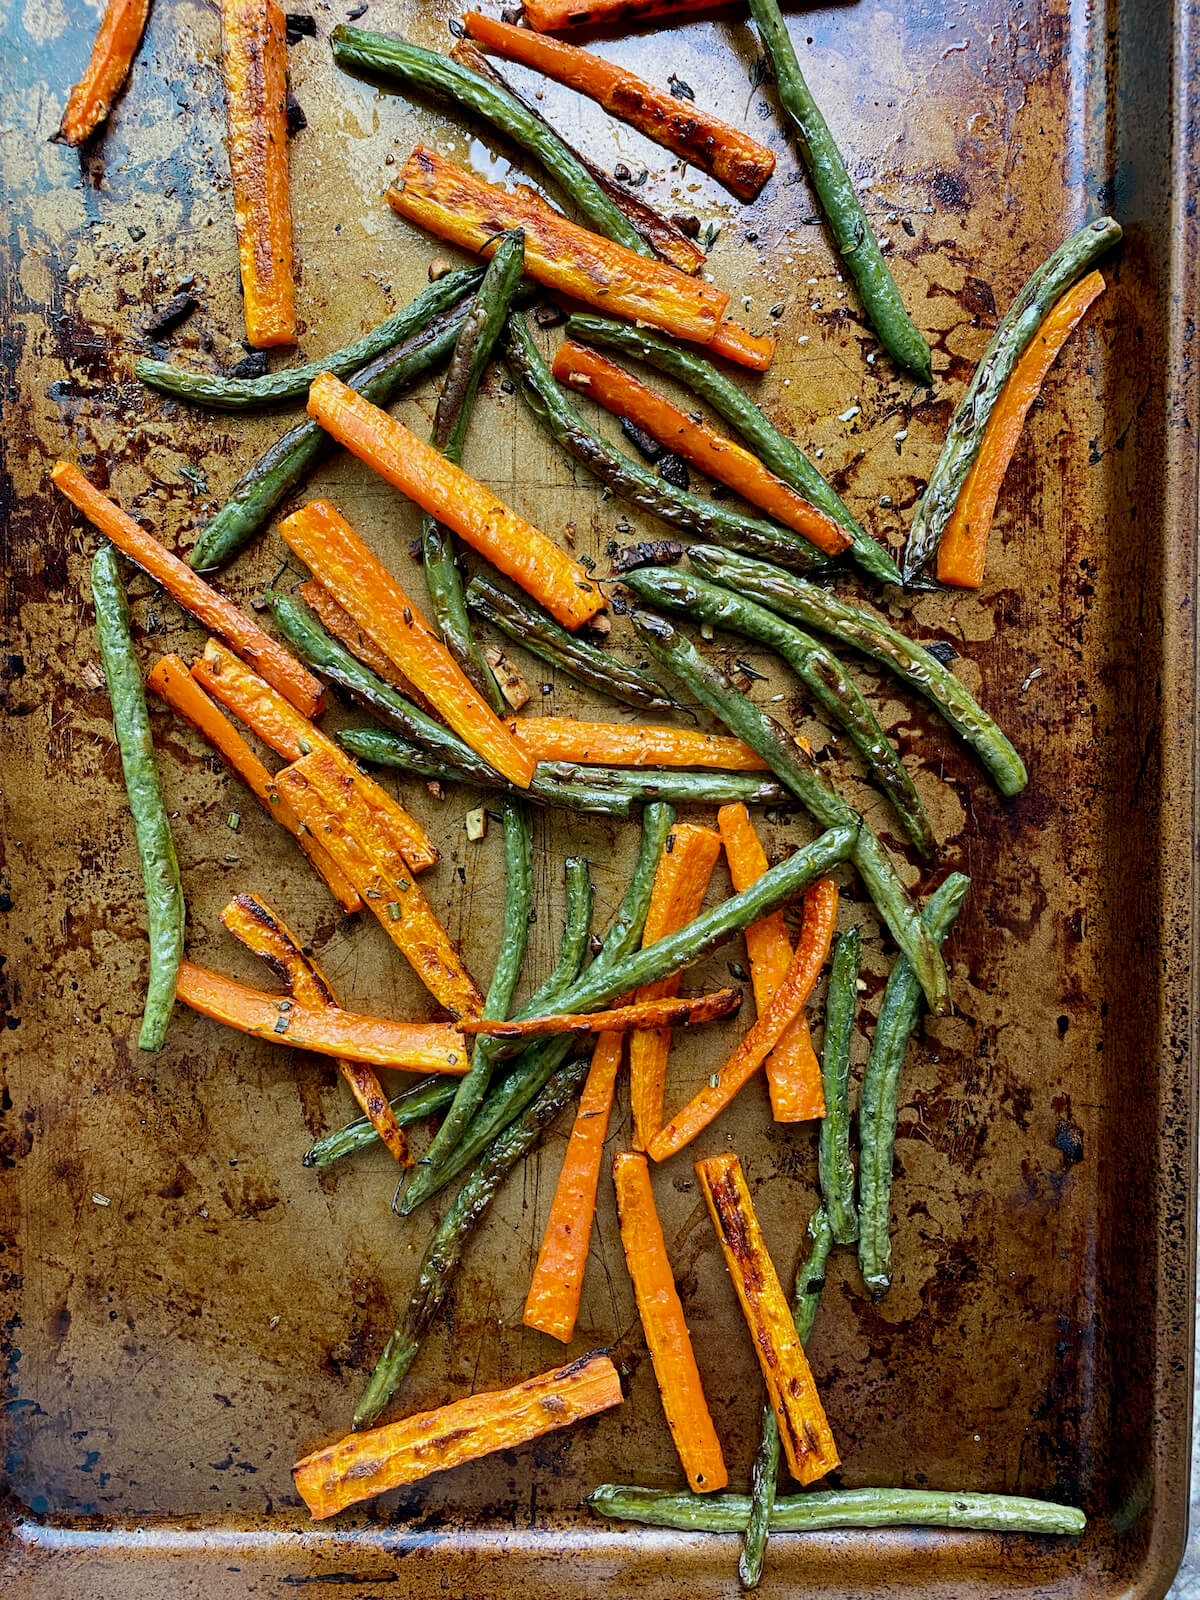 Roasted green beans and carrots on a rimmed baking sheet.